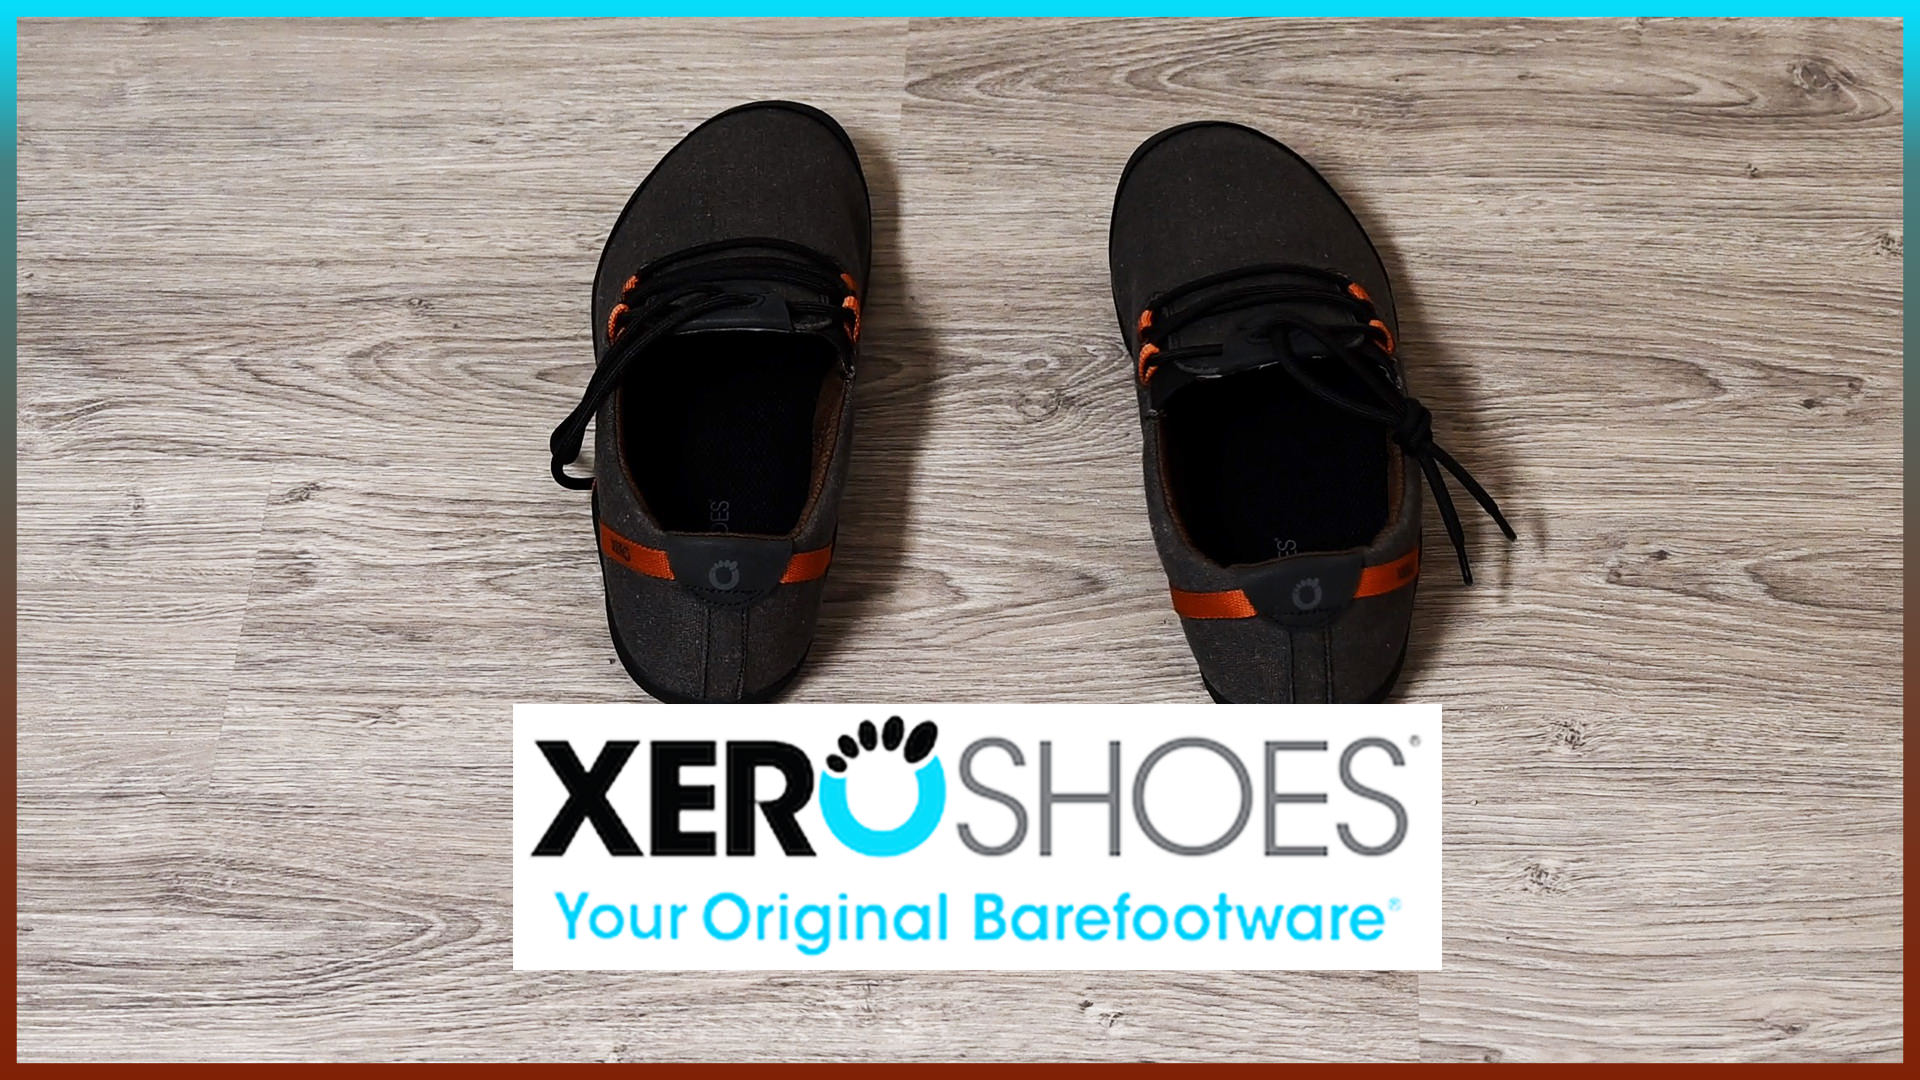 Xero Shoes Review from a Photographer